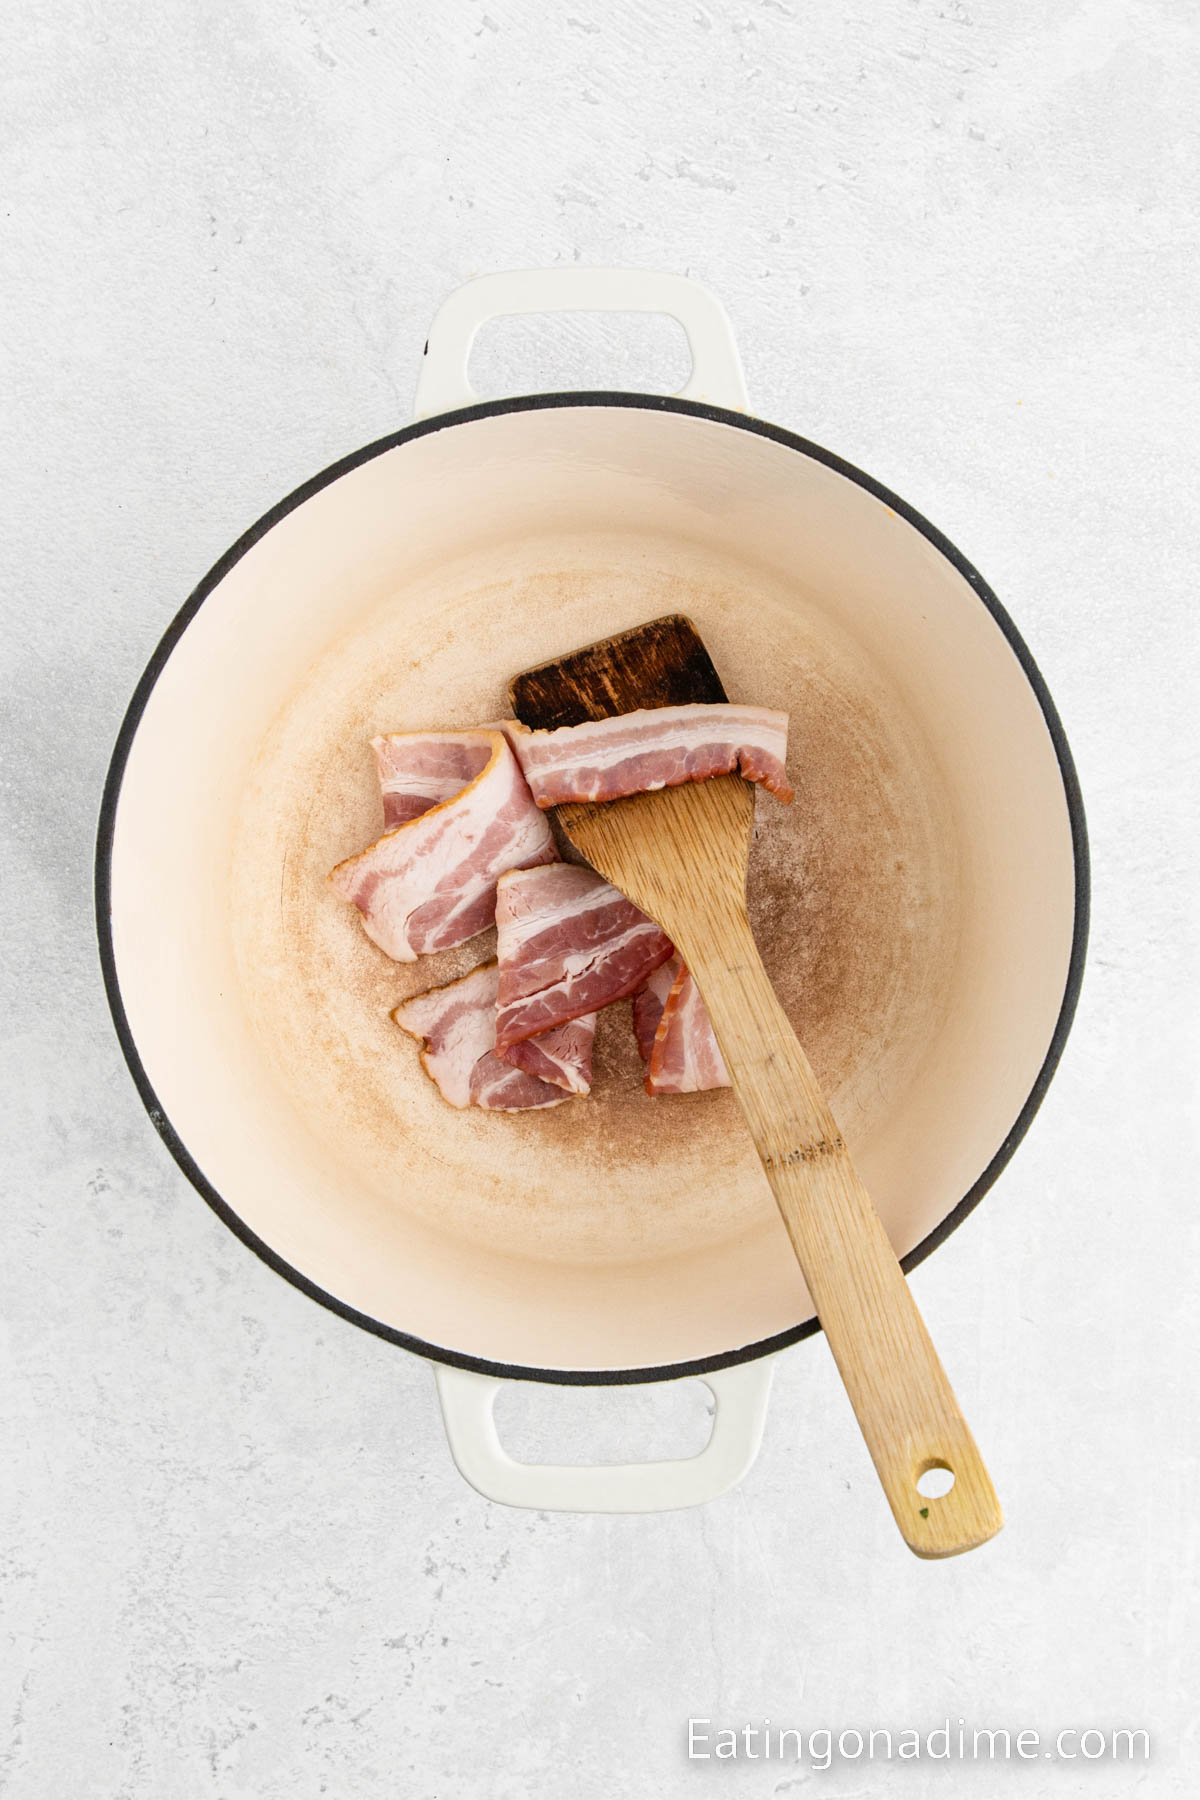 Cooking bacon in the large pot with a wooden spoon